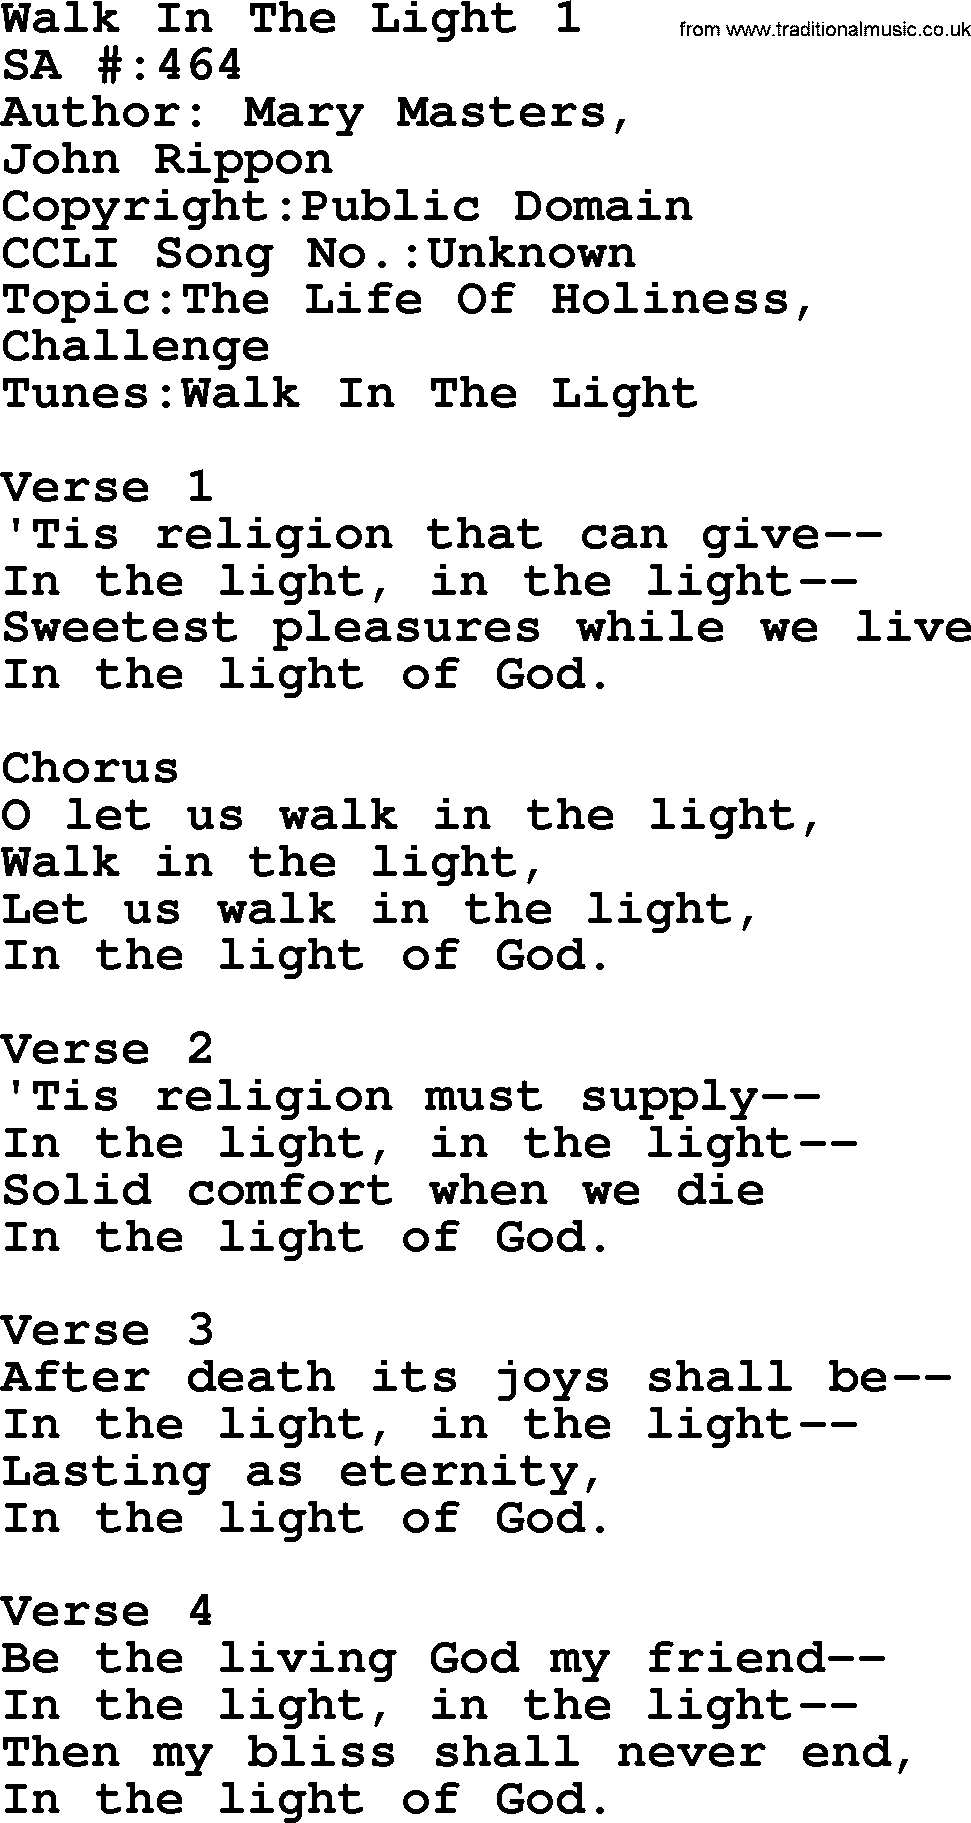 Salvation Army Hymnal, title: Walk In The Light 1, with lyrics and PDF,